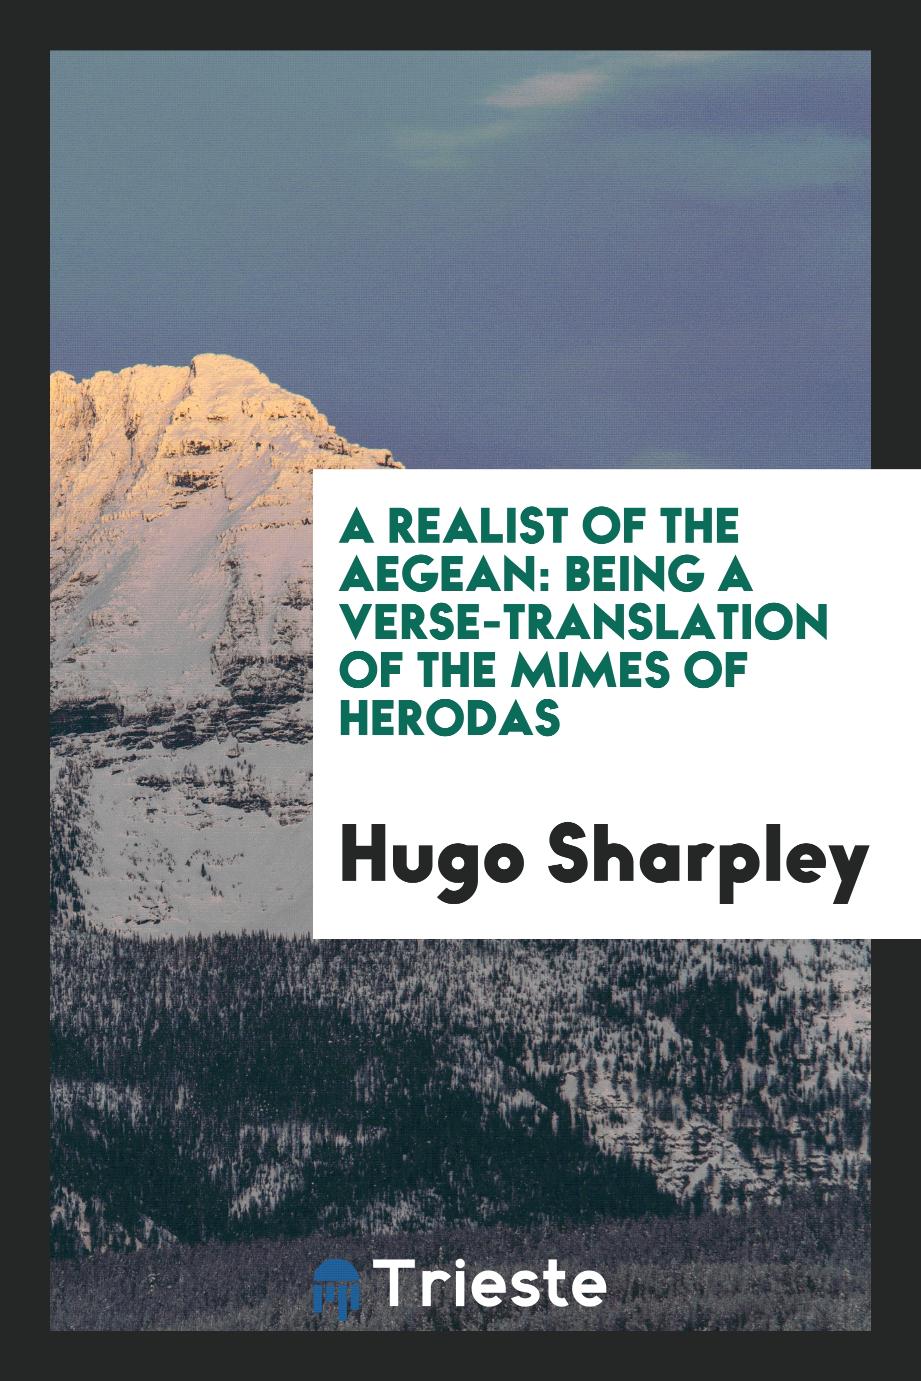 A Realist of the Aegean: Being a Verse-translation of The Mimes of Herodas